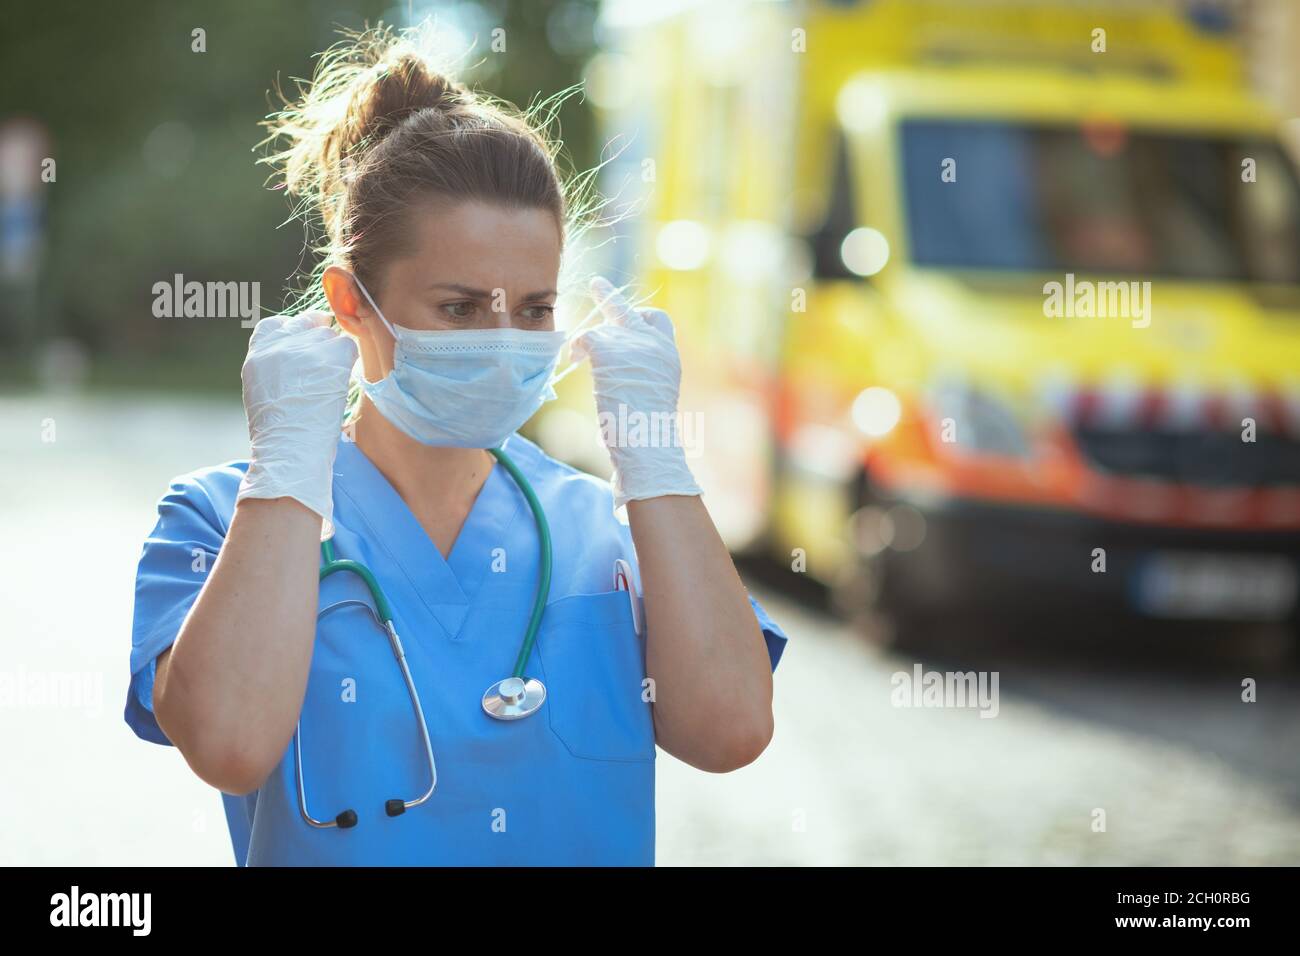 covid-19 pandemic. modern medical doctor woman in uniform with stethoscope and medical mask outside near ambulance. Stock Photo